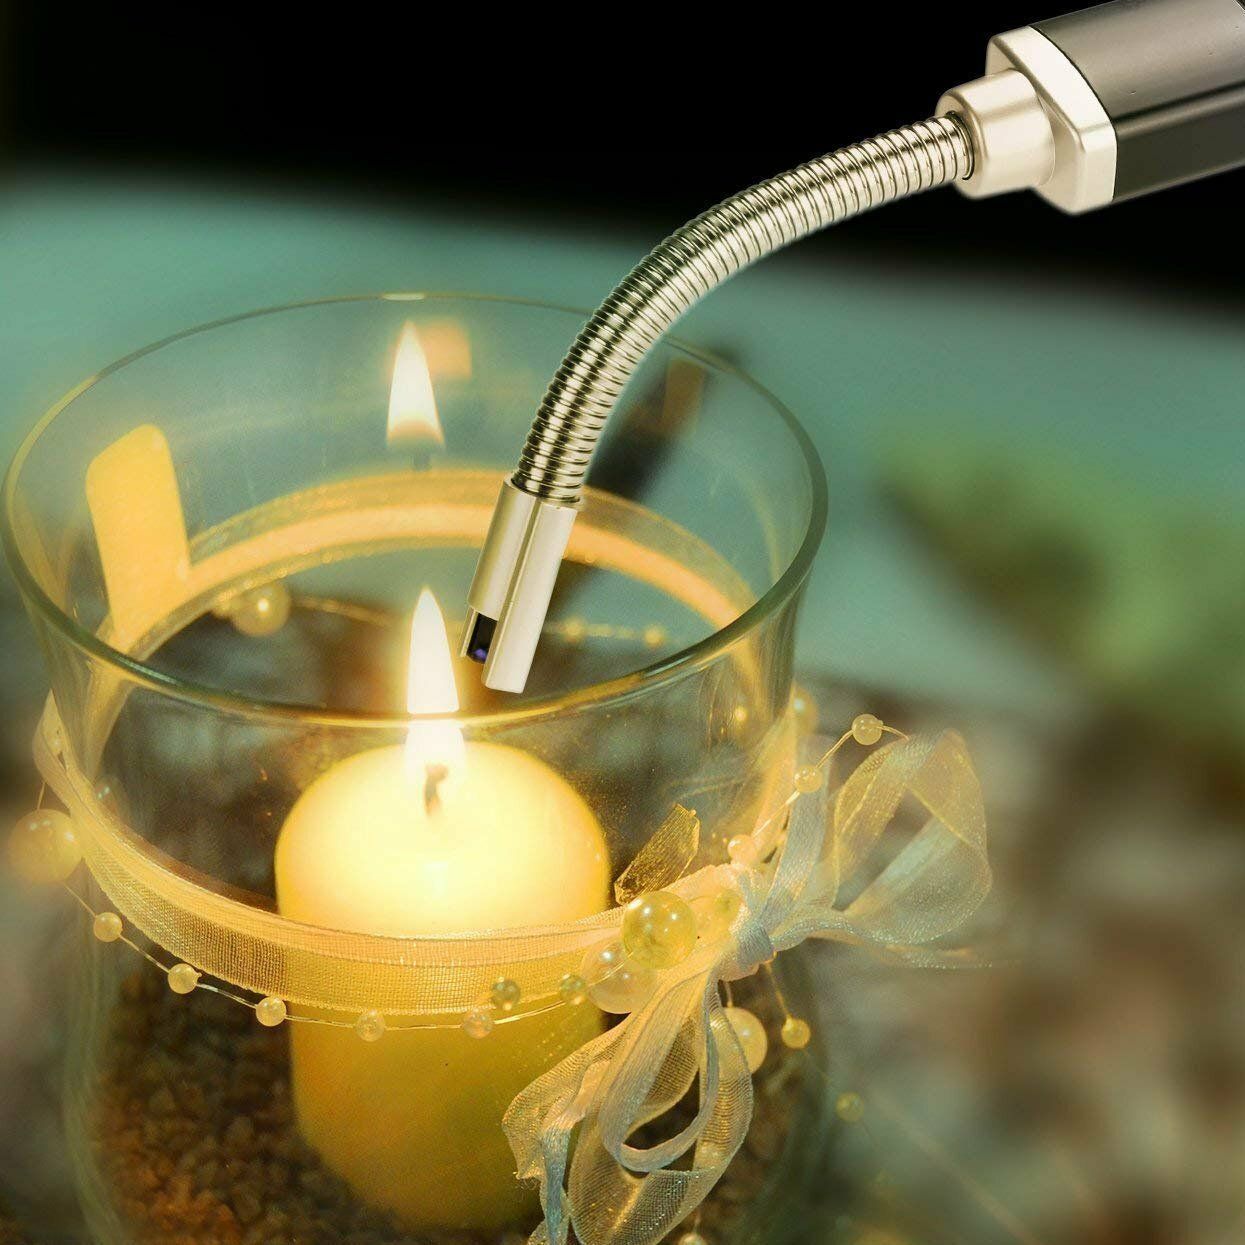 What are the Best Ways of Maintaining Your Electric Candle Lighter?